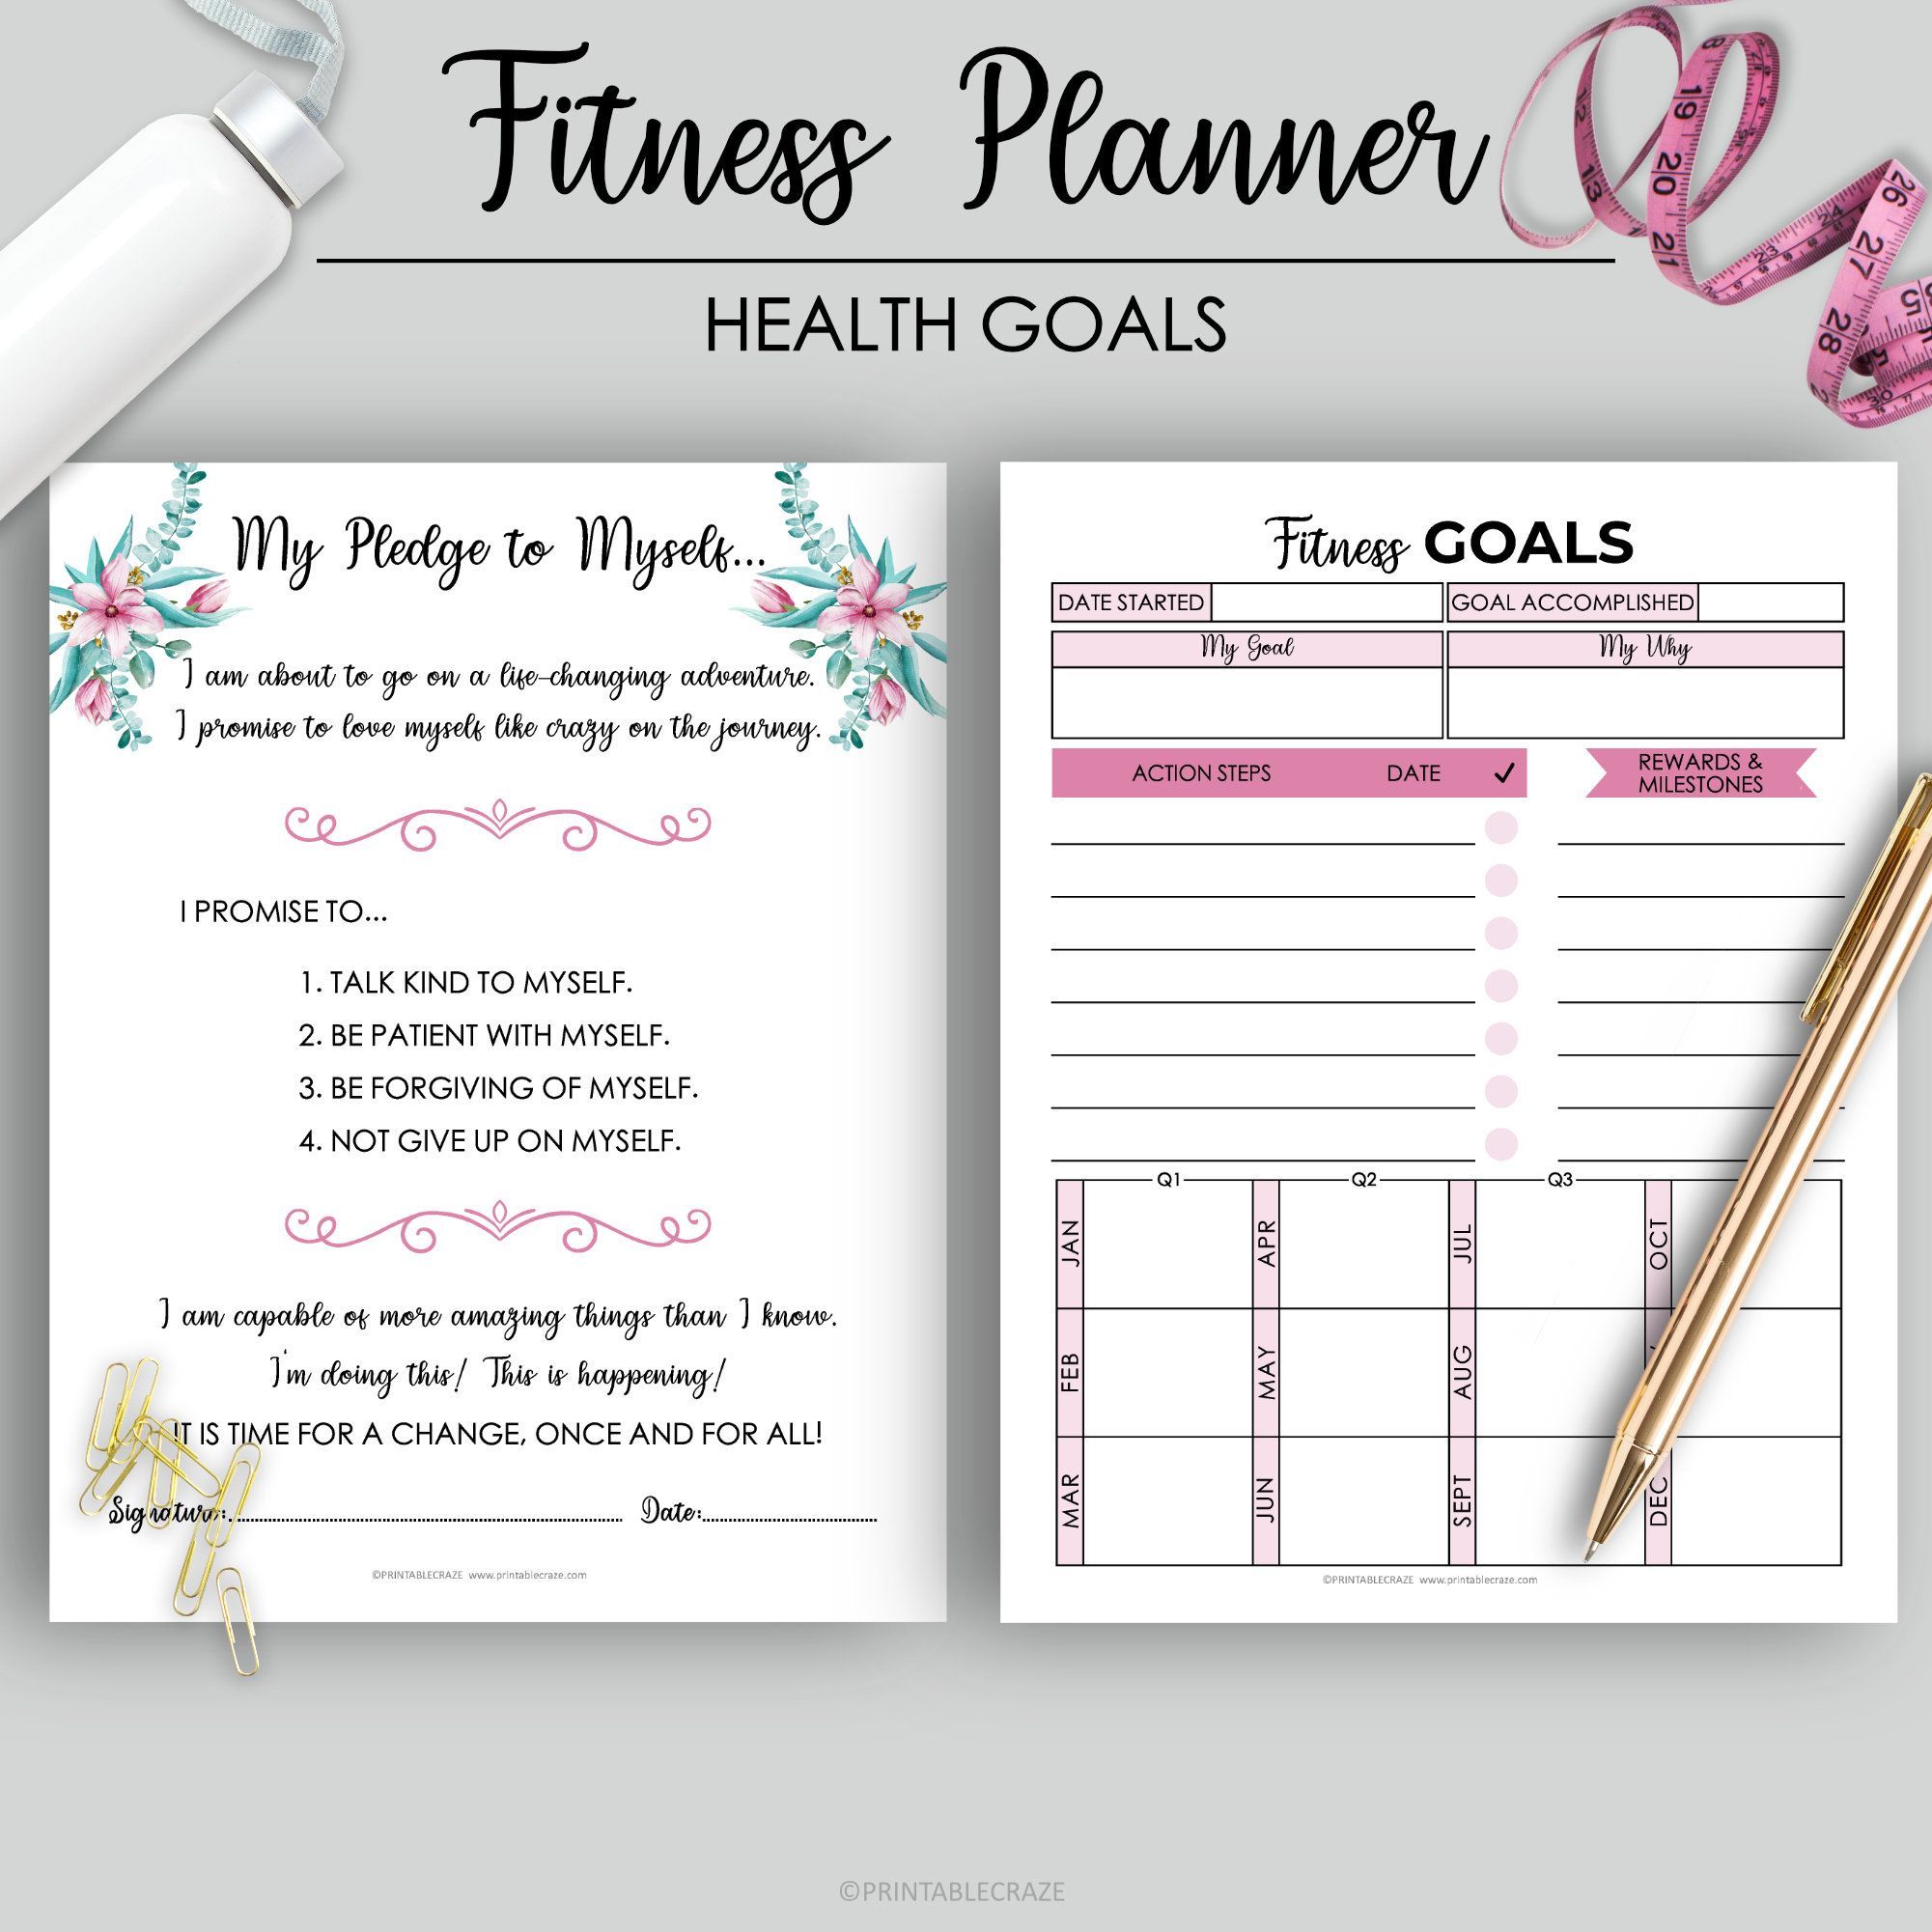 Fitness Planner Printable Weight Loss Health Planner Fitness Journal Workout Log Food Diary Calorie Tracker Daily Weight Loss Step Tracker - Fitness Planner Printable Weight Loss Health Planner Fitness Journal Workout Log Food Diary Calorie Tracker Daily Weight Loss Step Tracker -   18 fitness Journal deutsch ideas